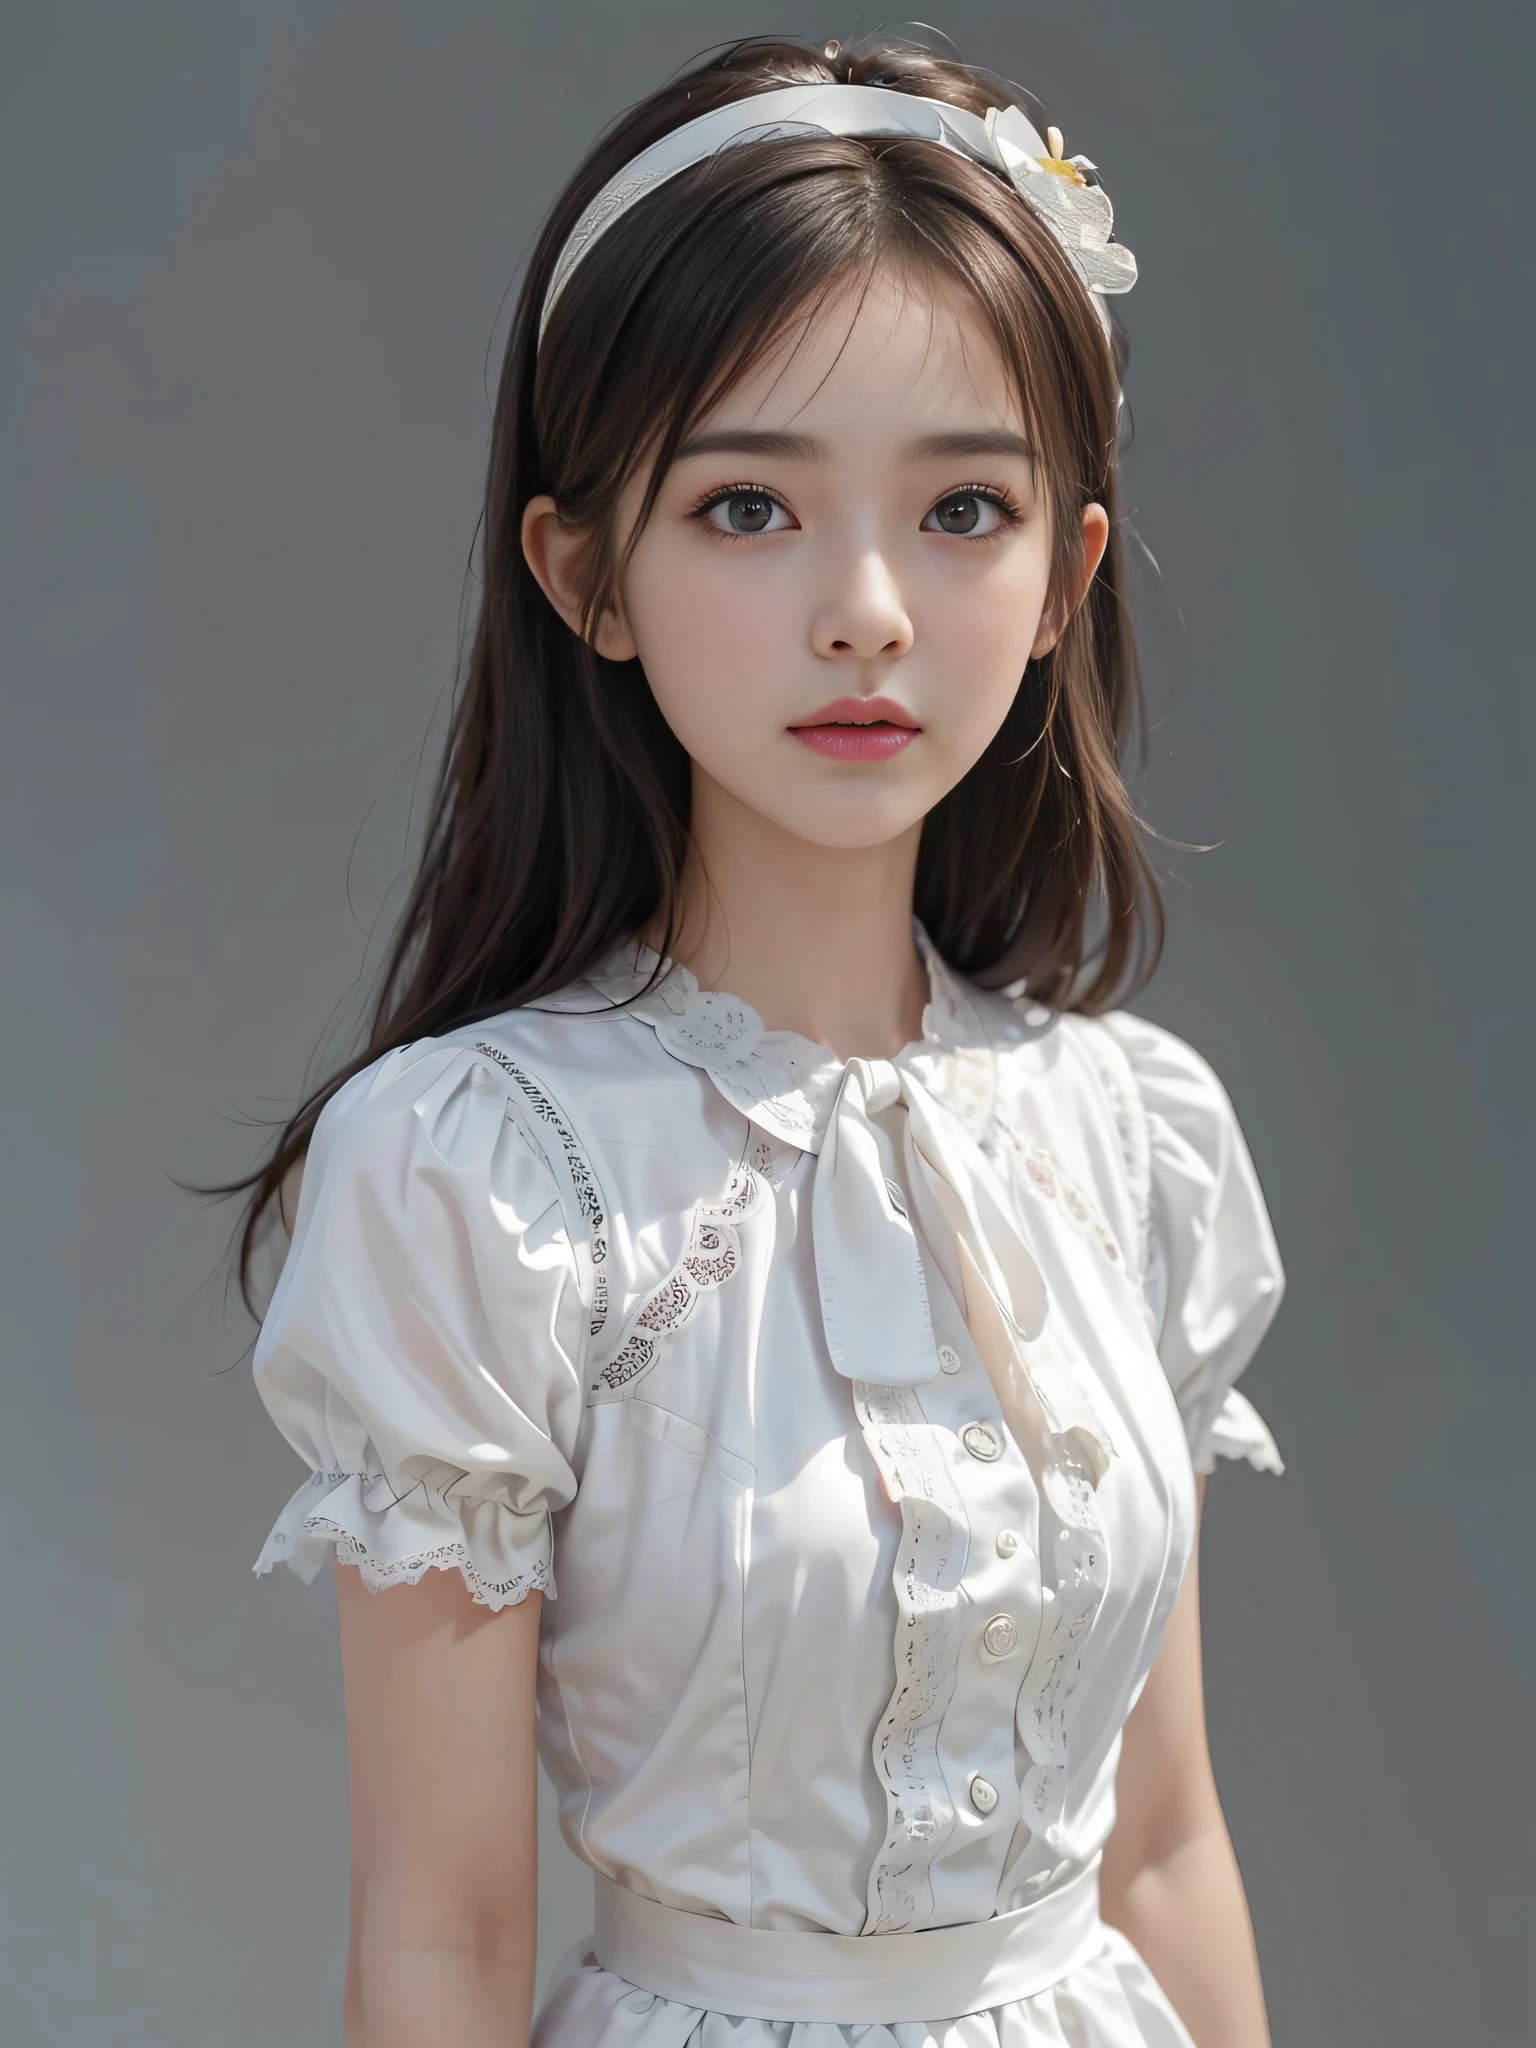 dressed, (photorealistic: 1.4), (hyperrealistic: 1.4), (realistic: 1.3), (smooth lighting: 1.05), (cinematic lighting quality improvement: 0.9), 32K, 1 girl, Japan woman, realistic lighting, backlit, face lights, ray tracking, (bright light: 1.2), (quality improvement: 1.4), ( Top quality realistic textured skin: 1.4), fine detailed eyes, detailed face, fine quality eyes, brown eyes, (tired and sleepy and satisfied: 0.0), white silk blouse with ruffles and lace, ribbon ties with thin strings, dark brown hair, short cropped bangs hanging on the forehead, small flower headband, one adult woman with a faint smile, (white background)